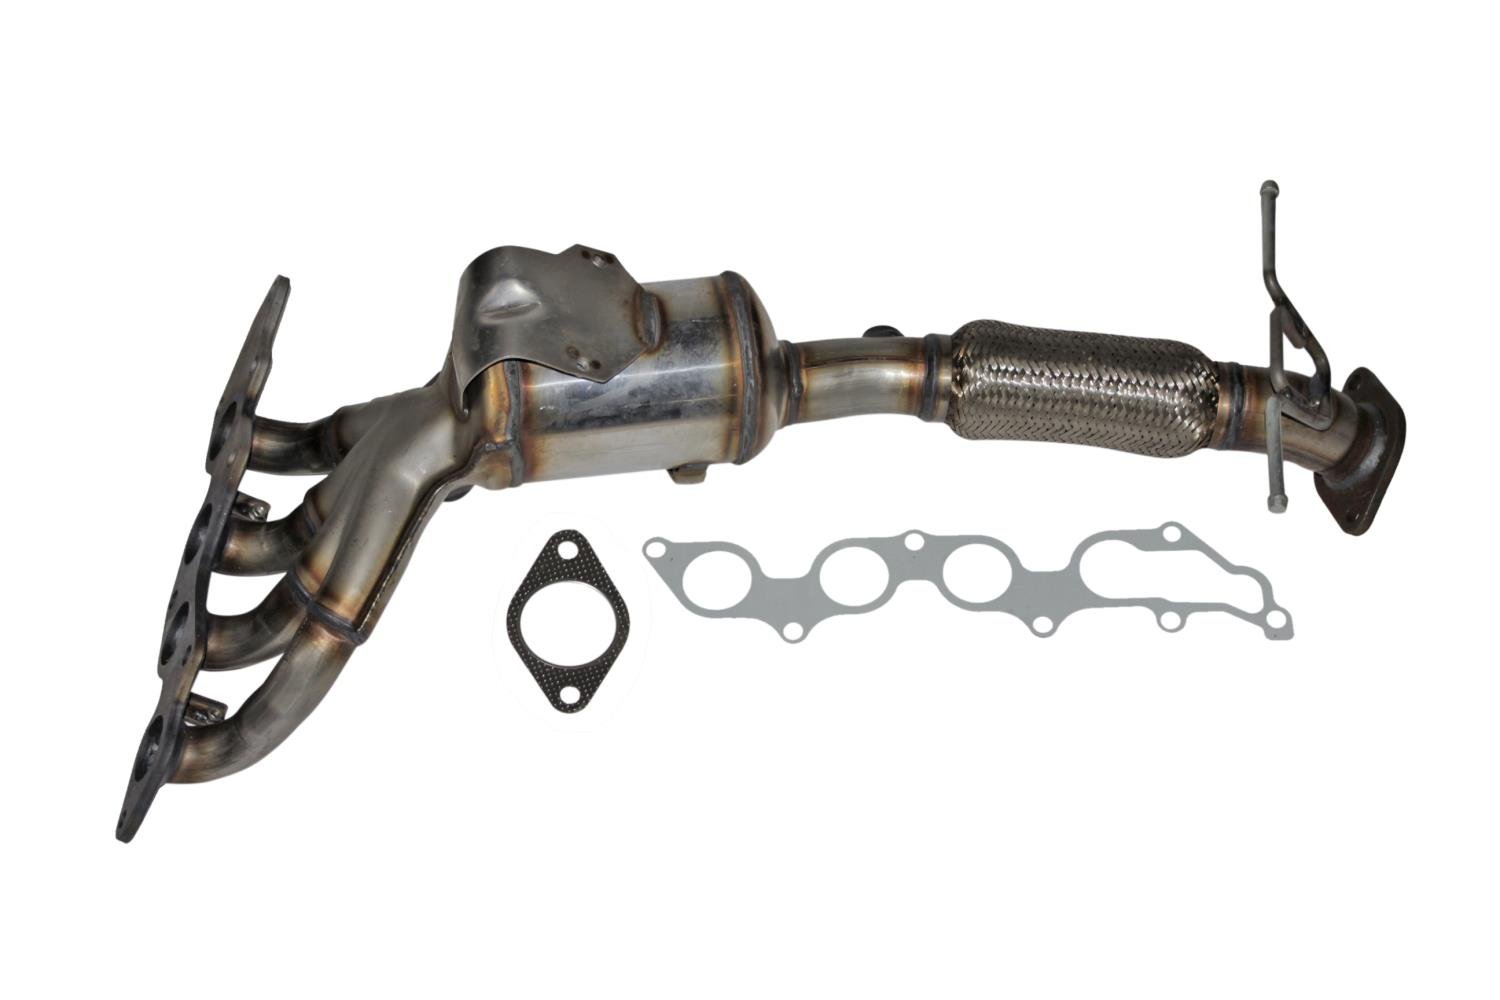 Catalytic Converter Fits Select 2004-2010 Mazda Models w/2.0L, 2.3L 4 cyl. Eng. [Front]